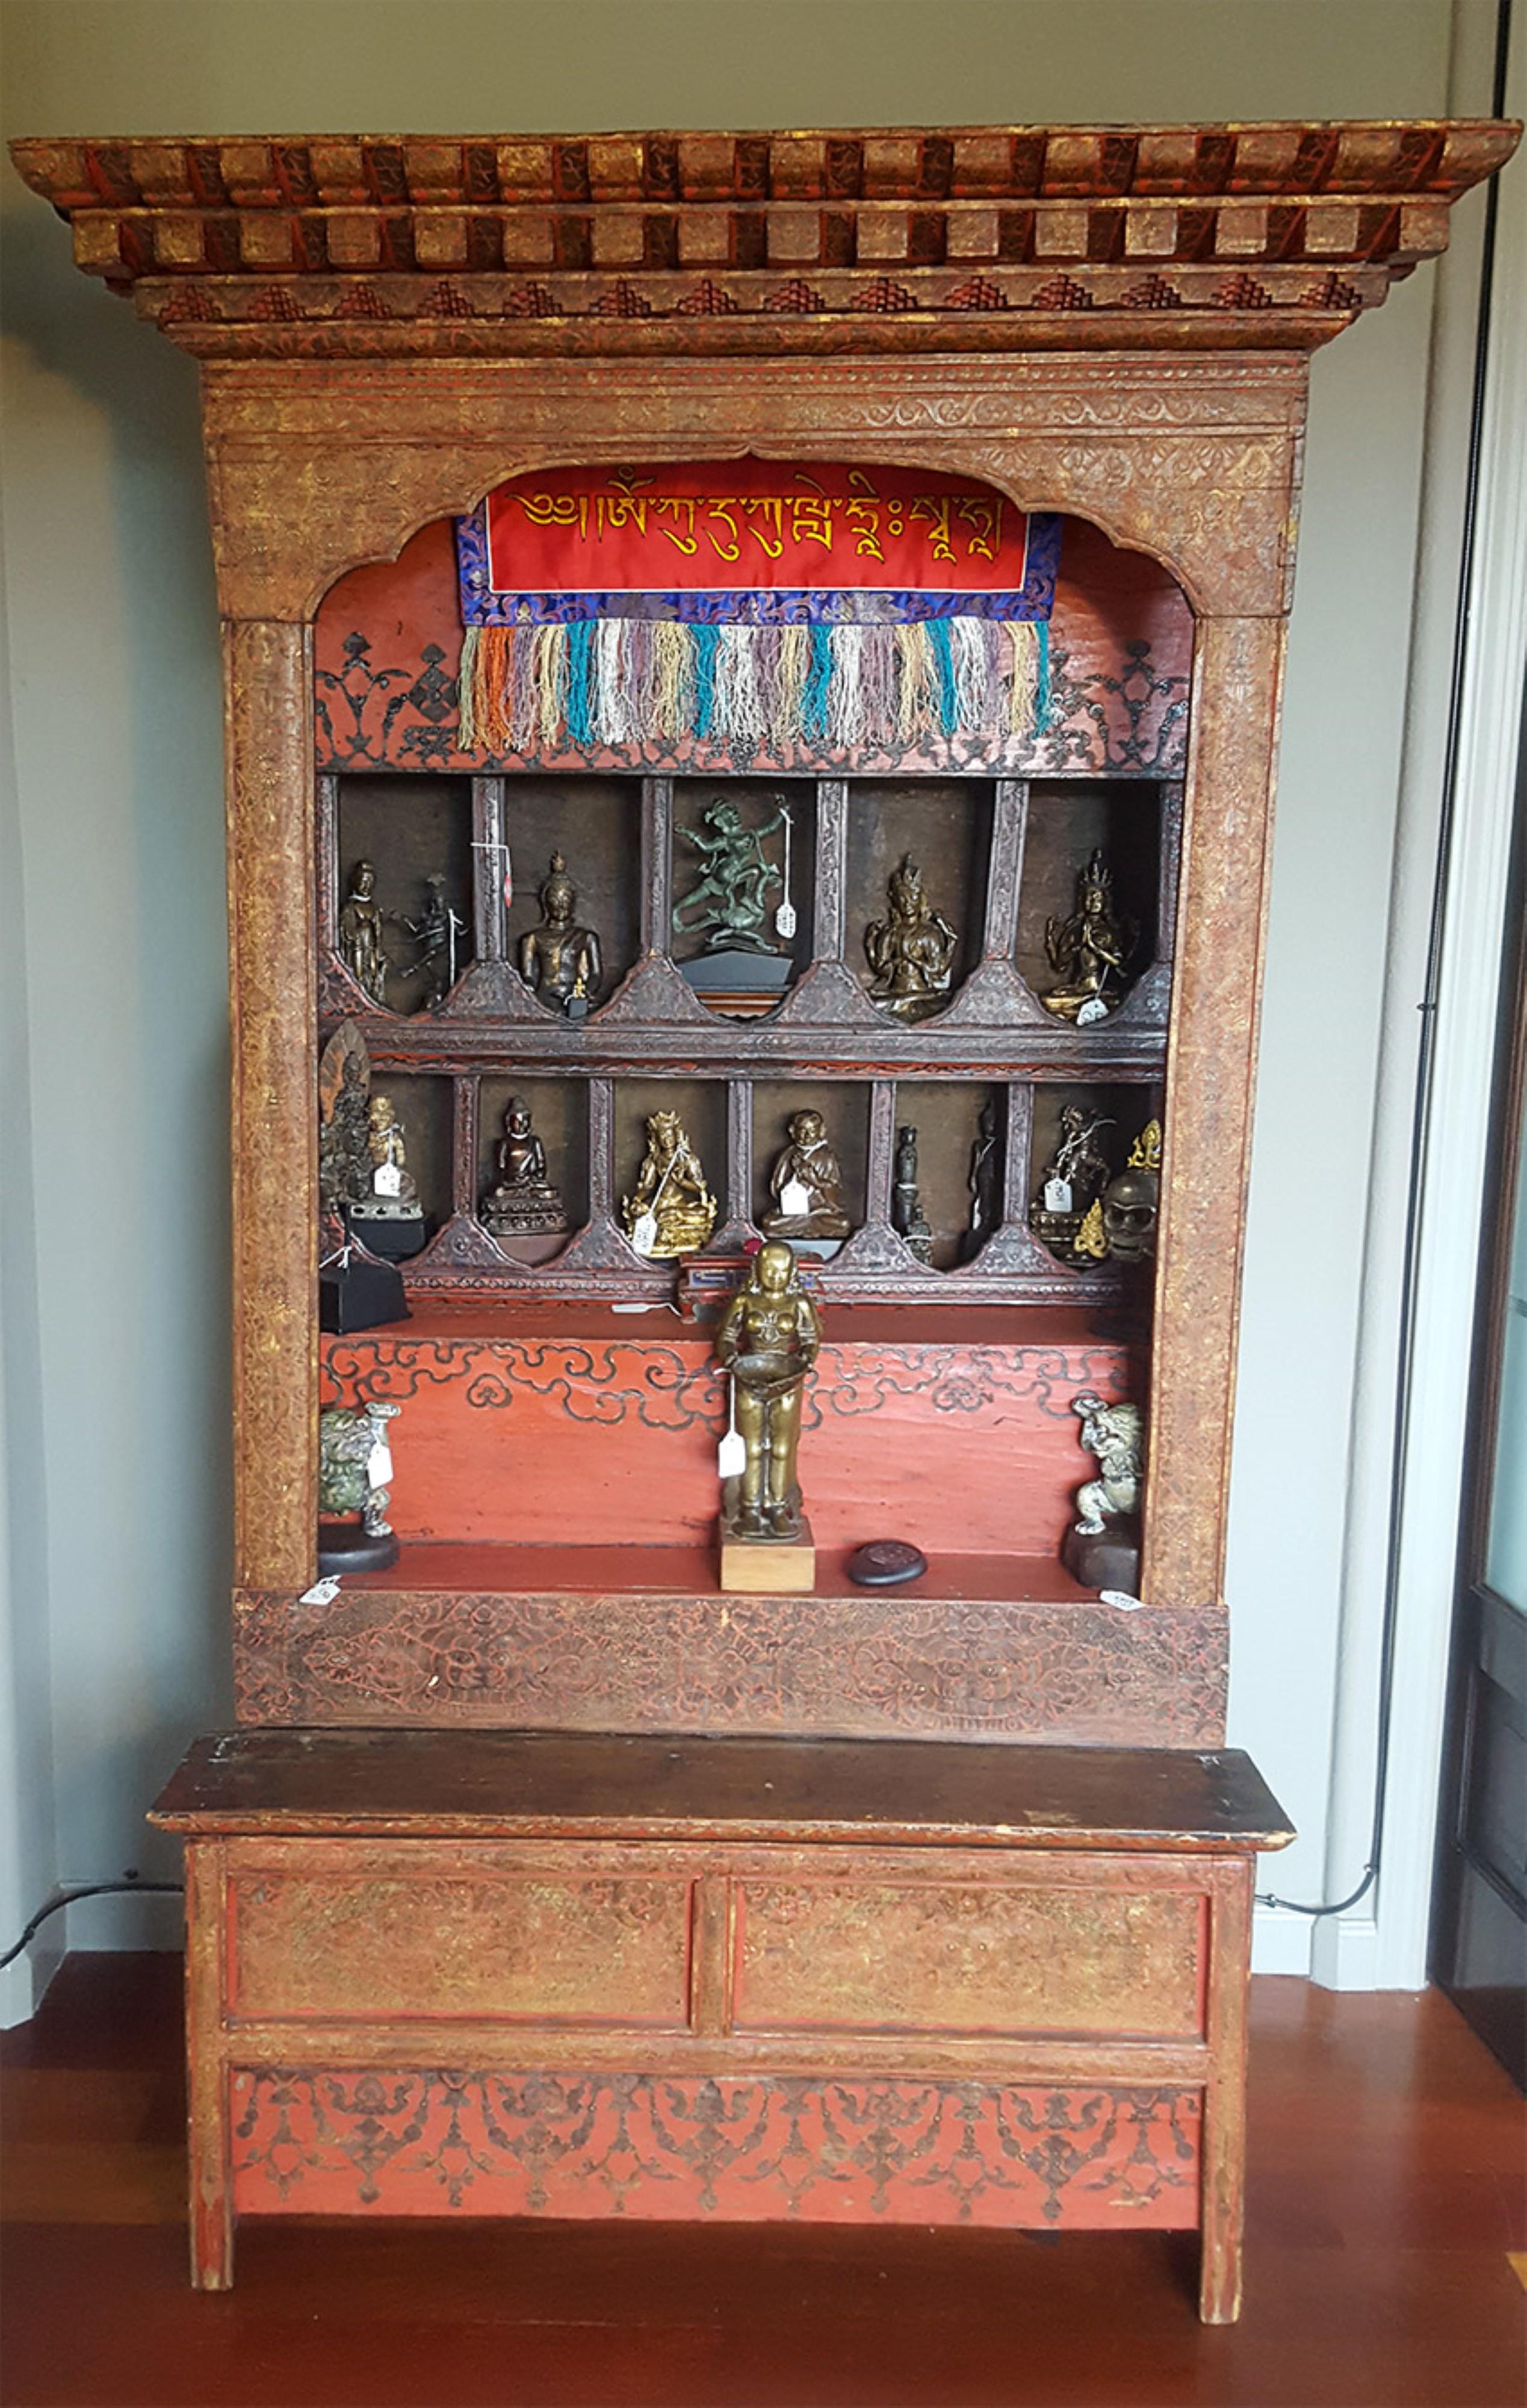 17-19thC Antique Tibetan altar from the estate of the great comedian Gary Shandling. The main part of the altar looks to be quite early based on construction and the very intricate lacquer design work, the way the wood is cut, the detail and design